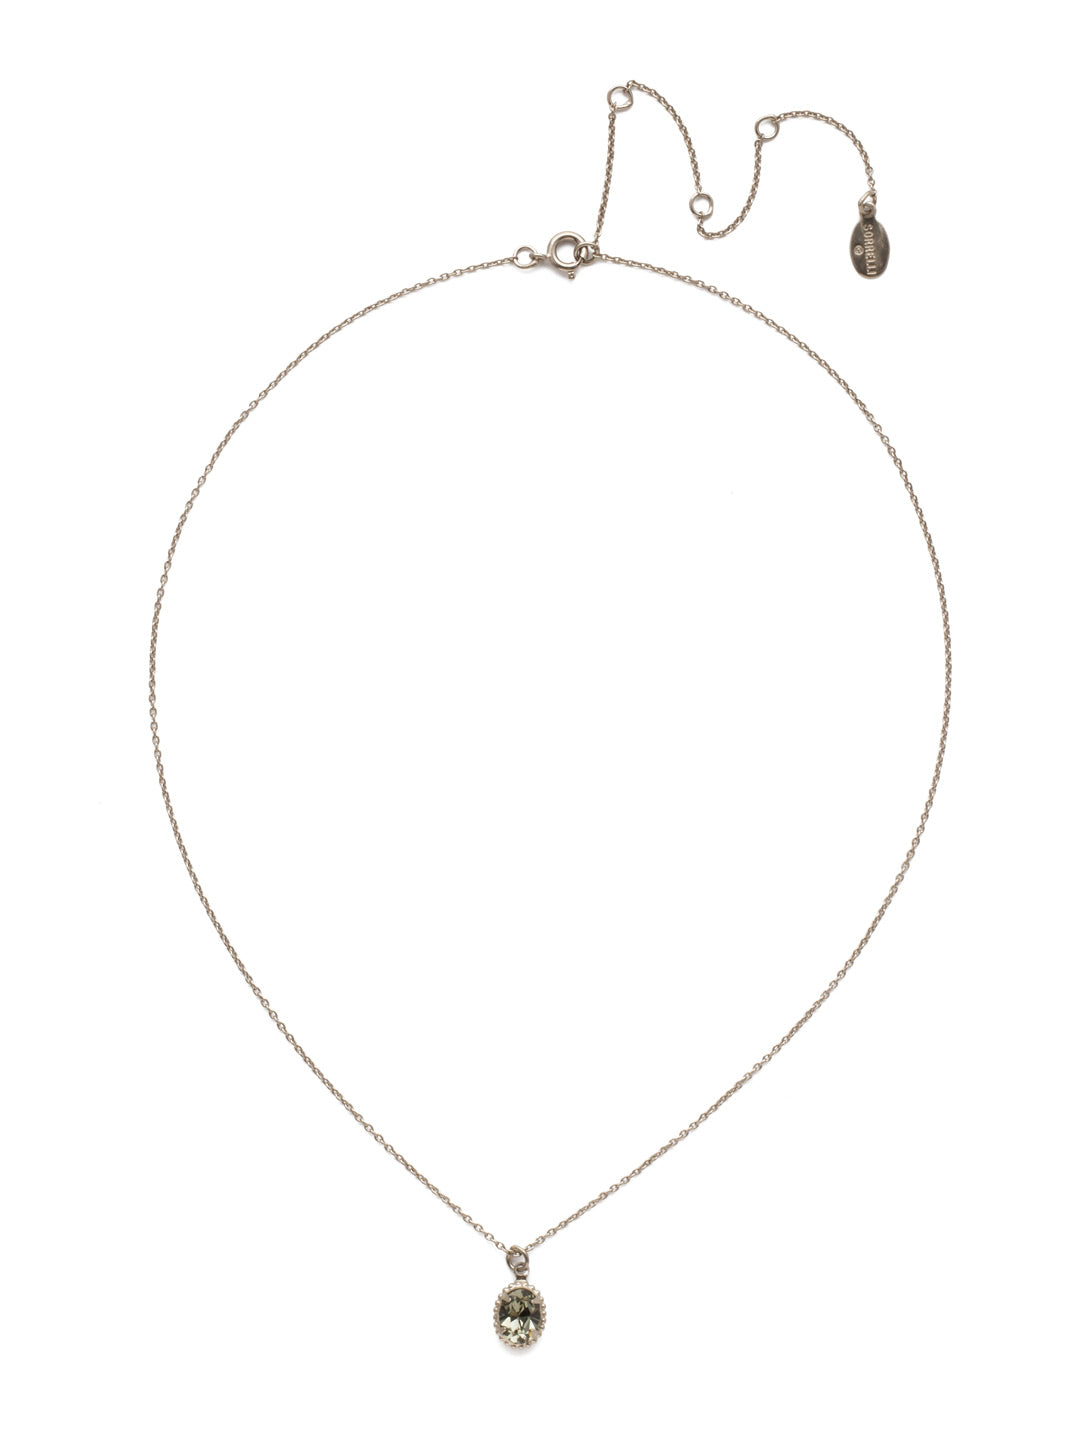 Maisie Pendant Necklace - NEF49ASBD - <p>This is the perfect day-to-night sparkling tiny pendant necklace that has an adjustable chain to fit your neckline. From Sorrelli's Black Diamond collection in our Antique Silver-tone finish.</p>